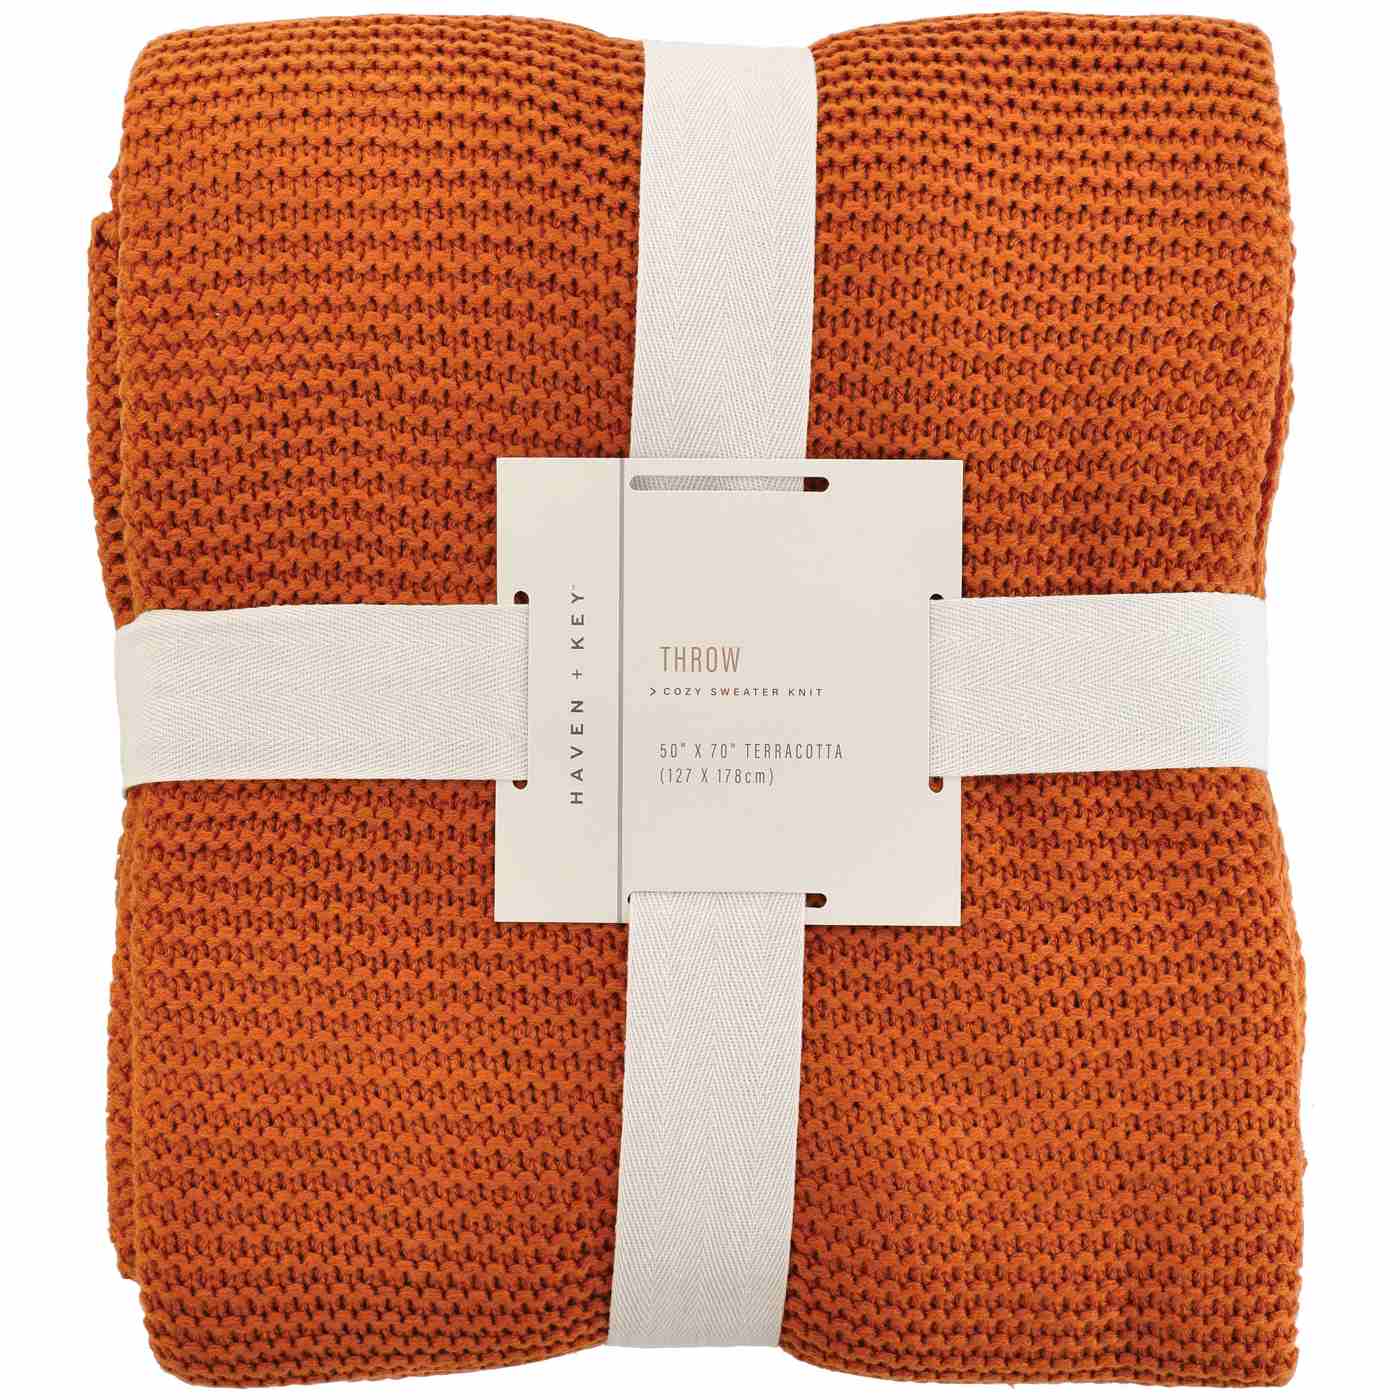 Haven + Key Cozy Sweater Knit Throw Blanket - Terracotta; image 1 of 2